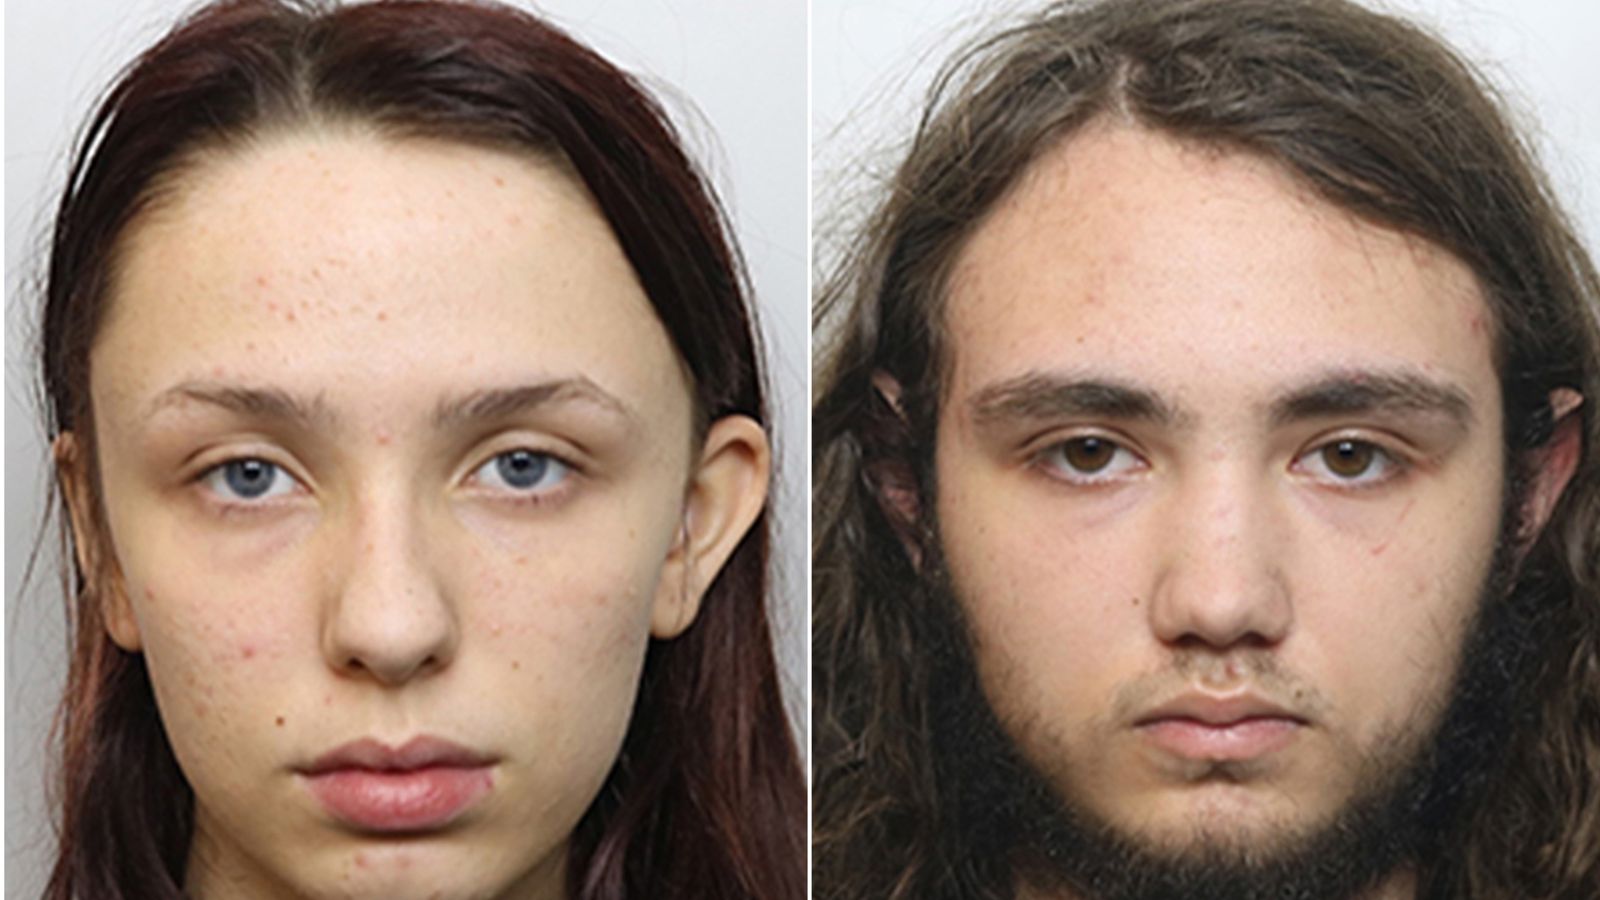 Scarlett Jenkinson and Eddie Ratcliffe named as Brianna Ghey's teenage killers - but victim's father disagrees with judge's decision